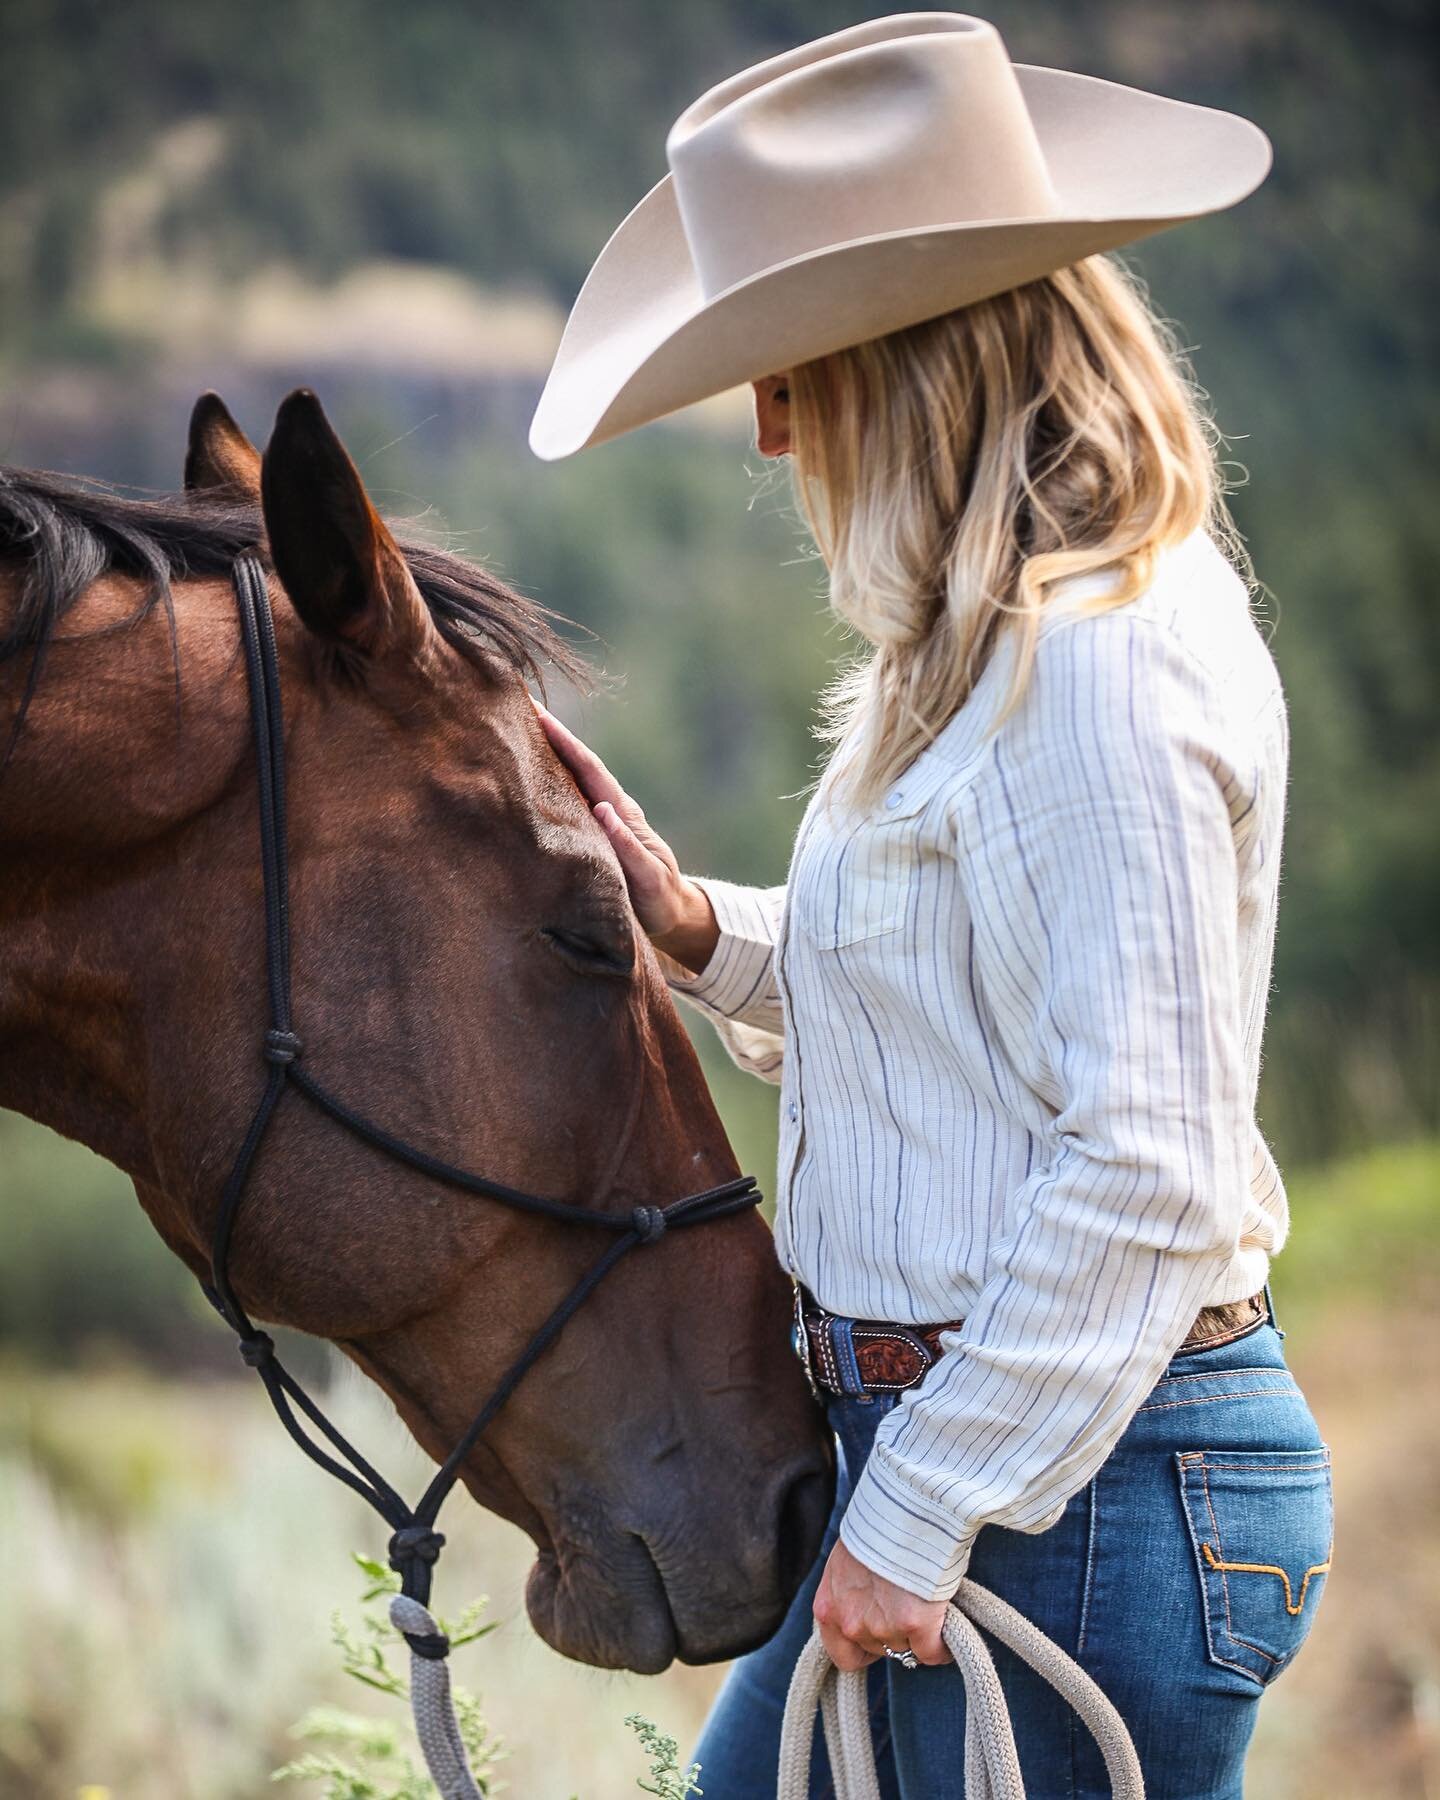 I want to be deeply connected to my horses. I want my horses to feel both powerful and comforted in my presence. To have them work with me as a willing partner and look to me for leadership and guidance. The ability to ride their strength and shape t